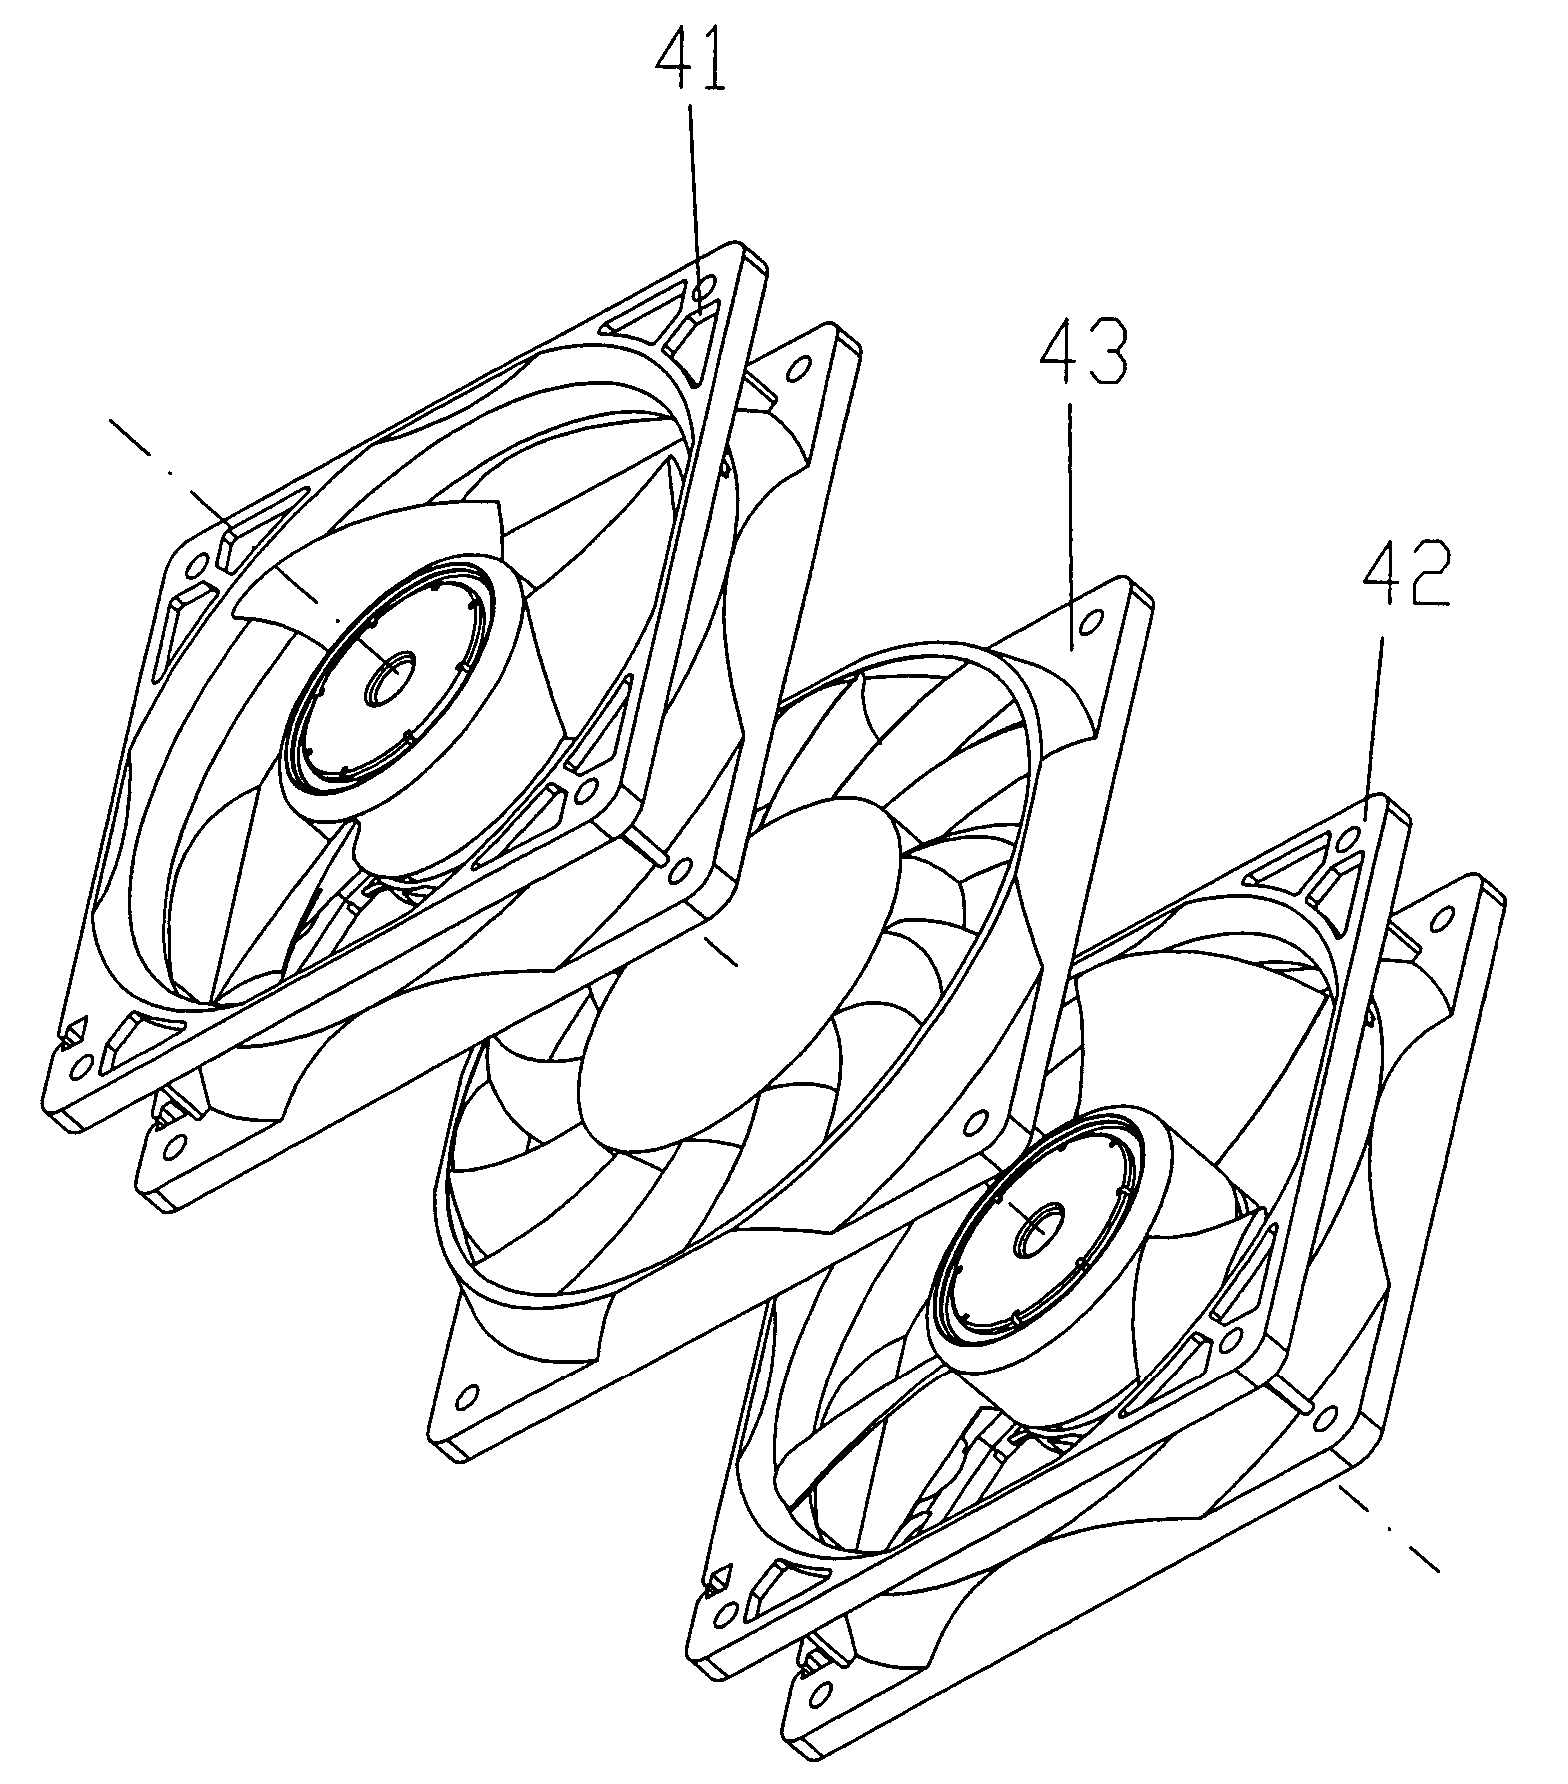 Composite heat-dissipating system and its used fan guard with additional supercharging function